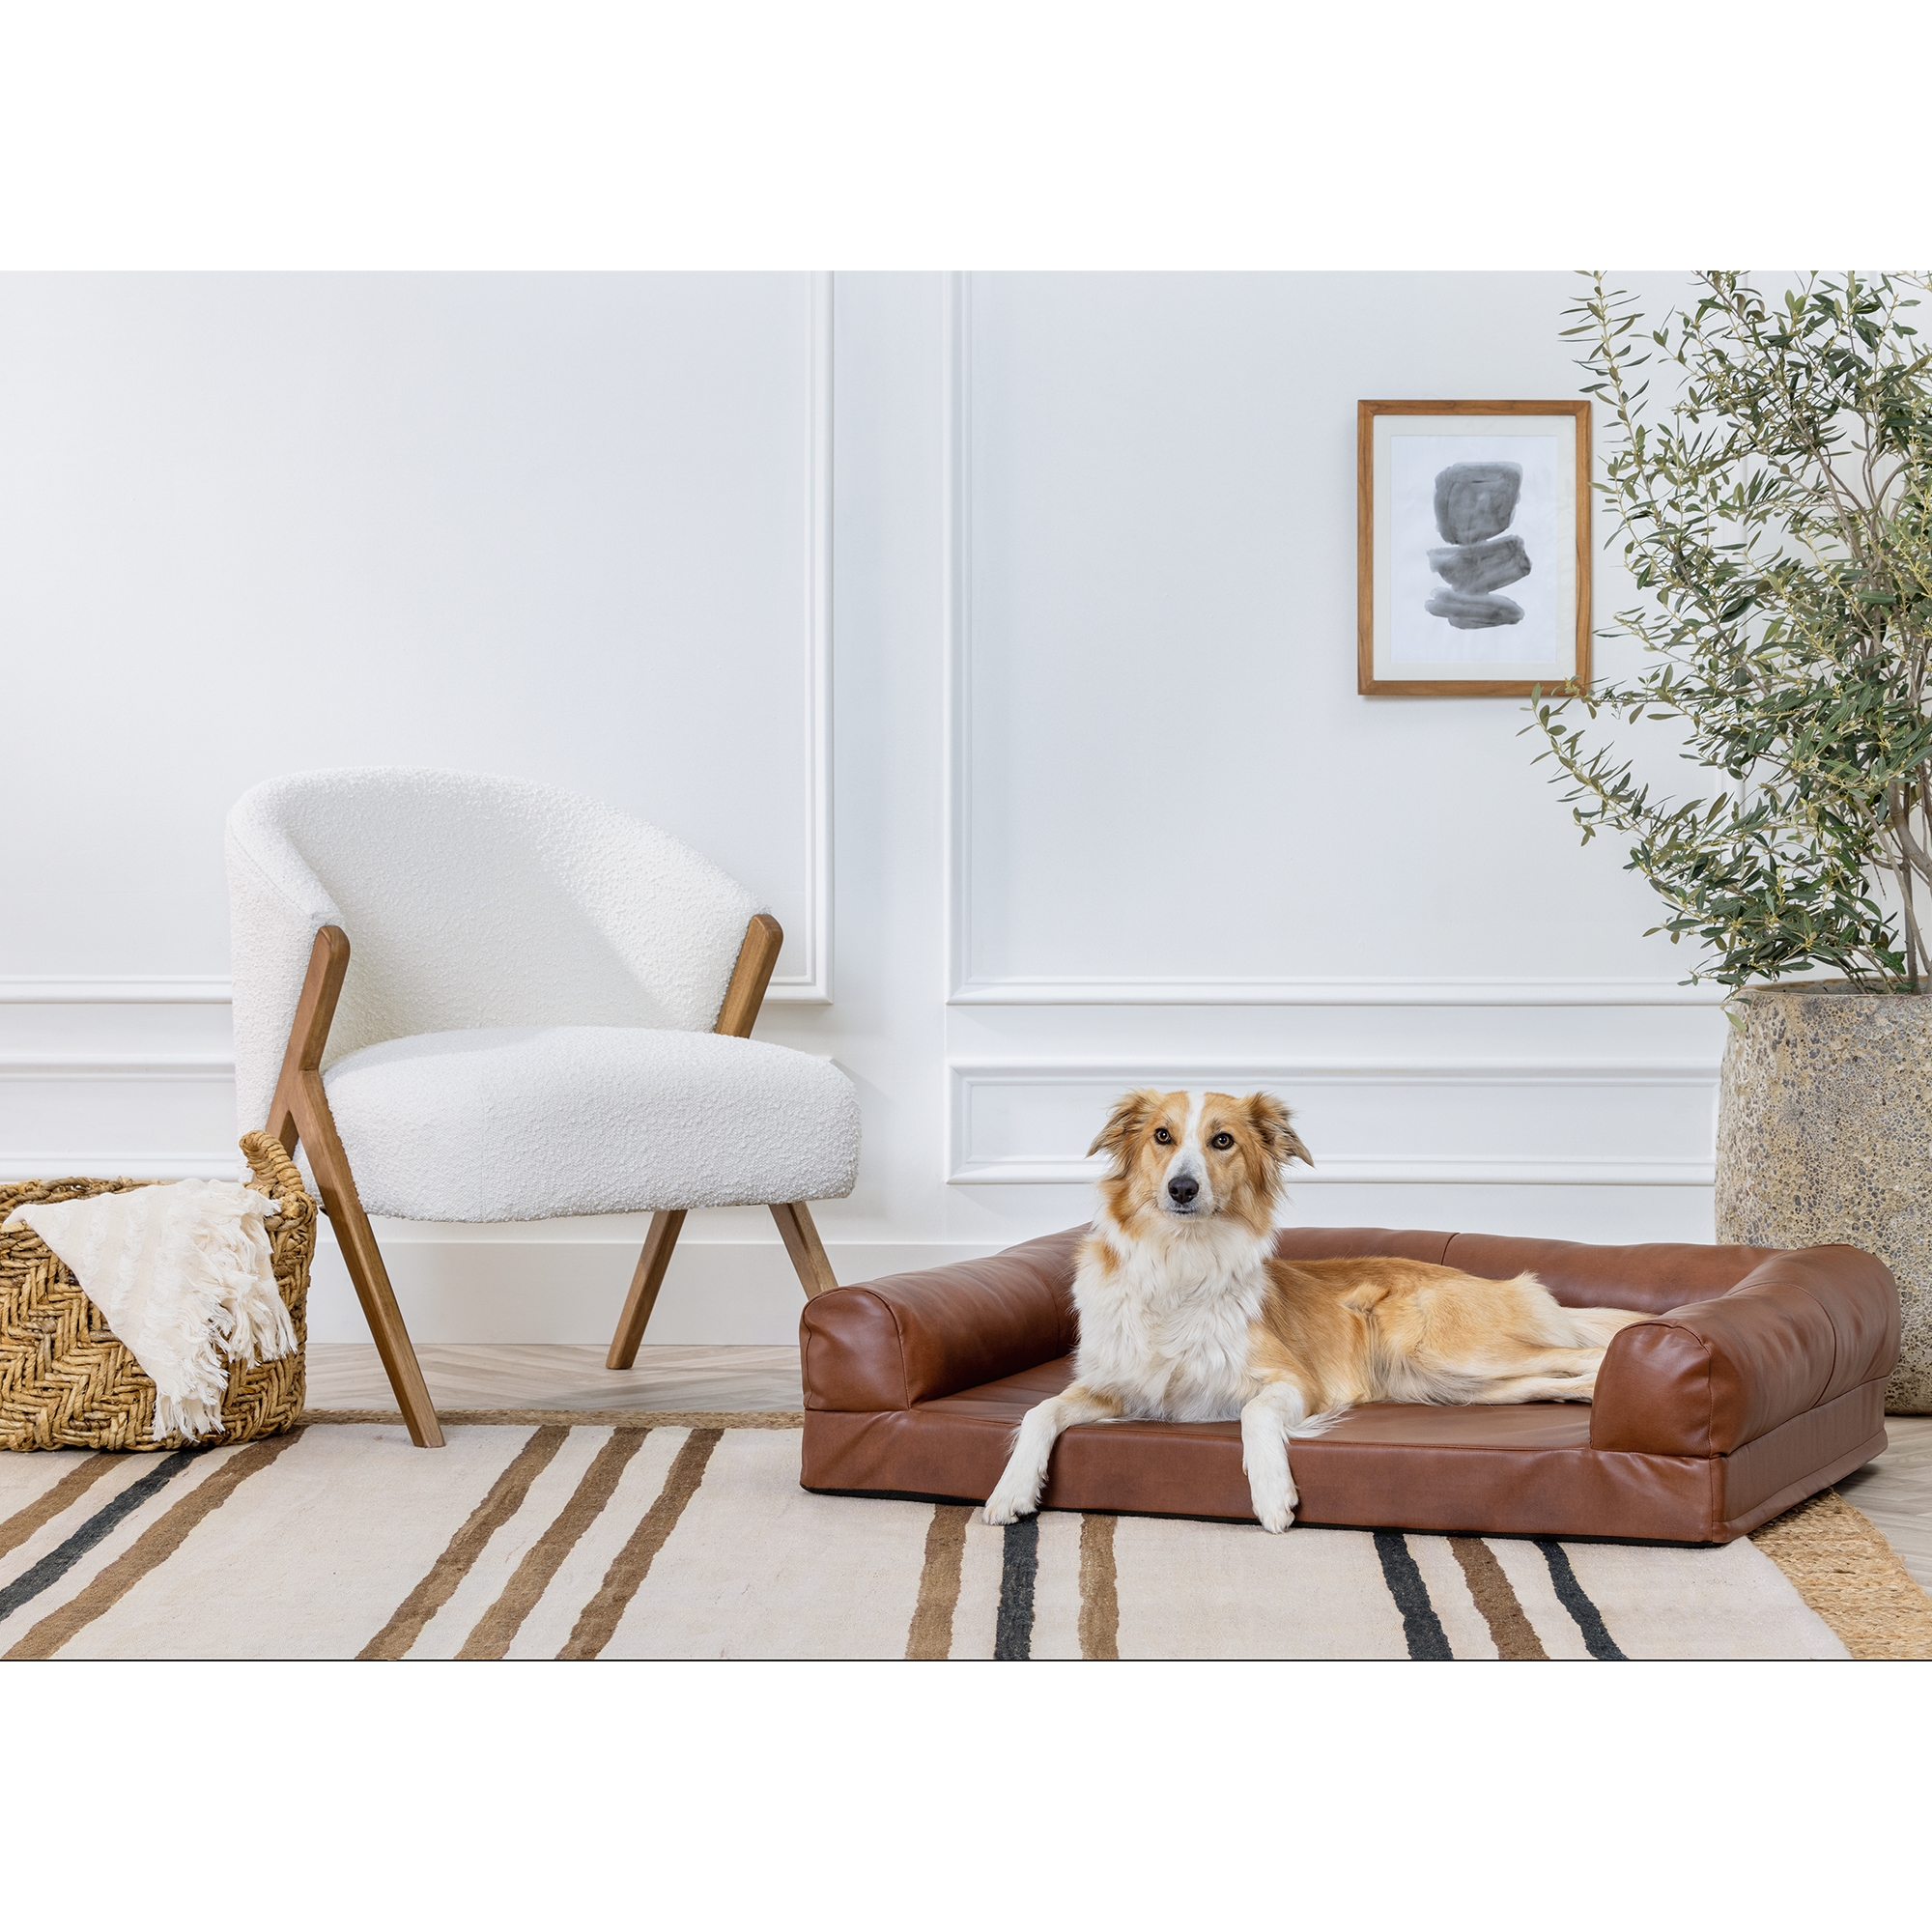 A dog lounging on the Nate Berkus and Jeremiah Brent PetSmart collab dog bed